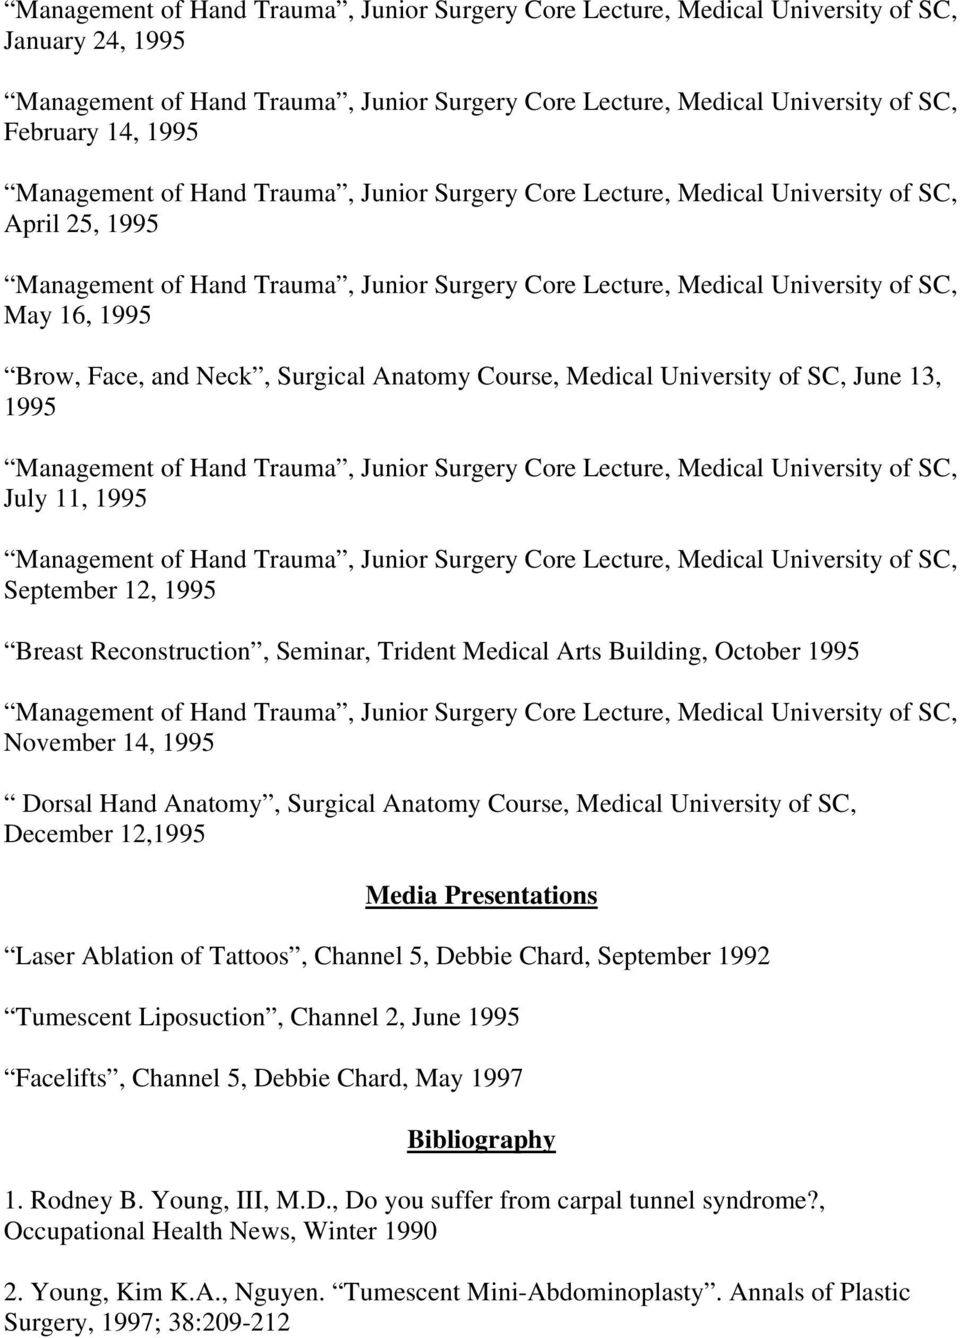 Presentations Laser Ablation of Tattoos, Channel 5, Debbie Chard, September 1992 Tumescent Liposuction, Channel 2, June 1995 Facelifts, Channel 5, Debbie Chard, May 1997 Bibliography 1.